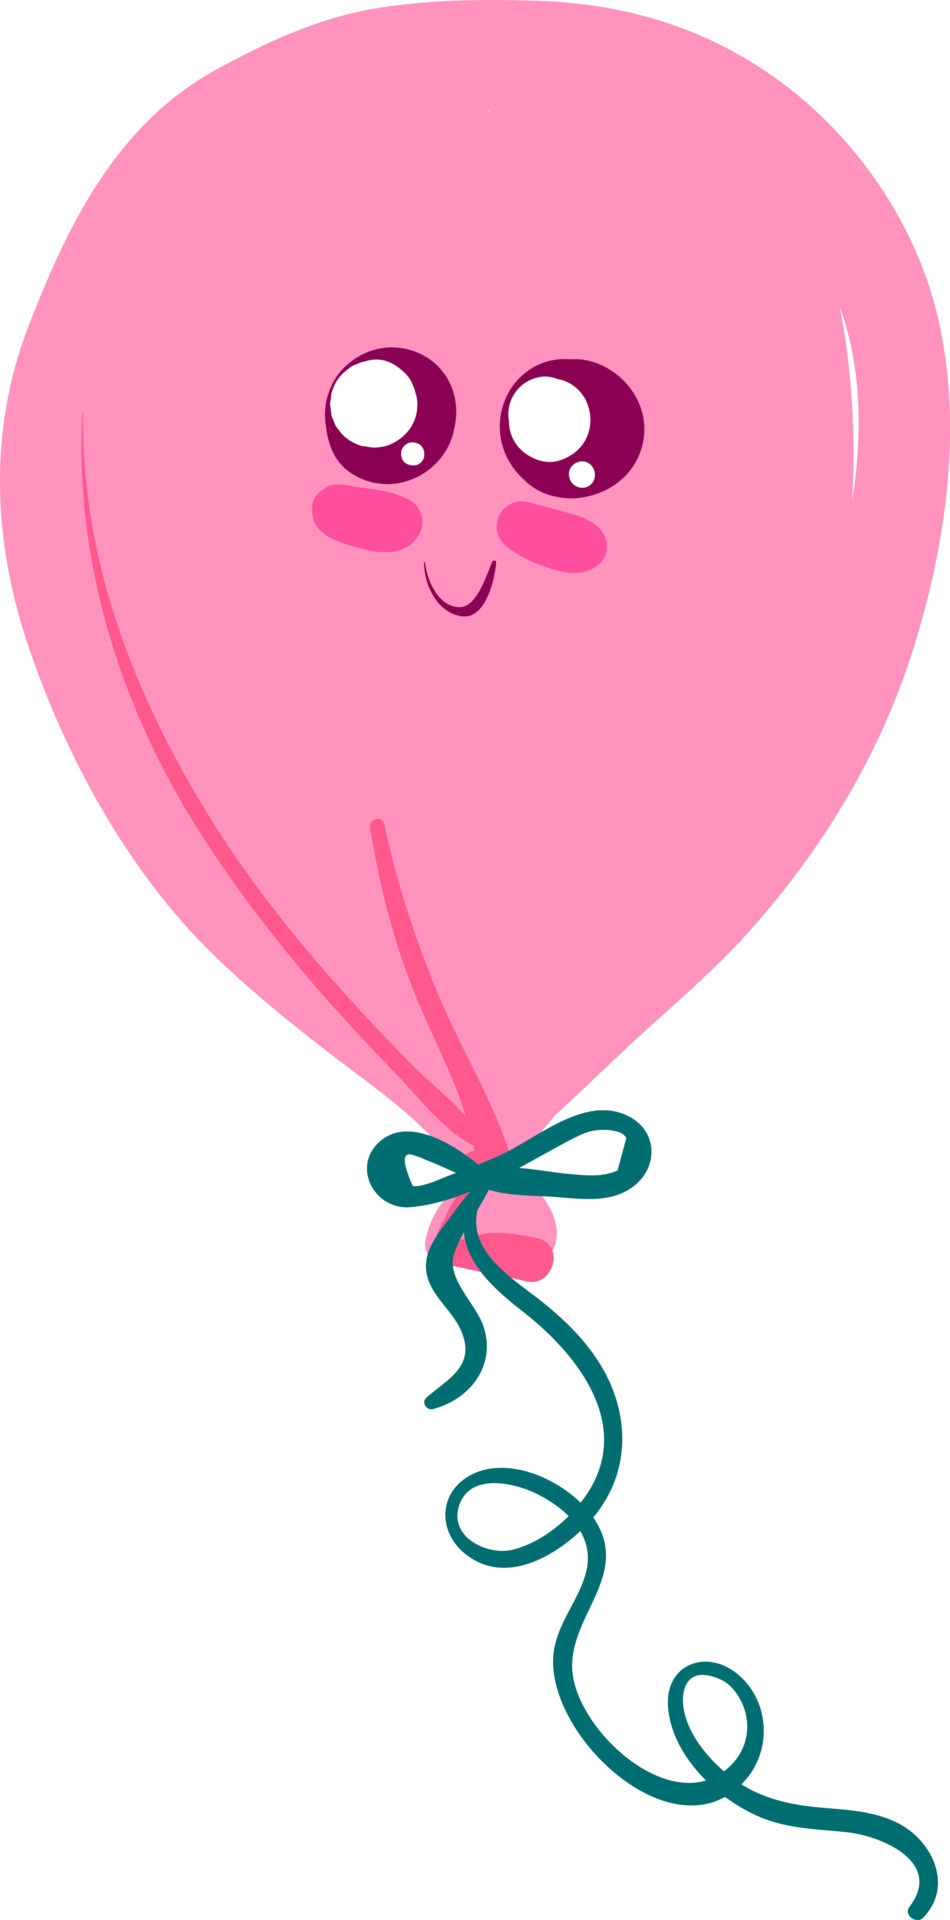 Cute pink balloon, illustration, vector on white background. 13531400 ...